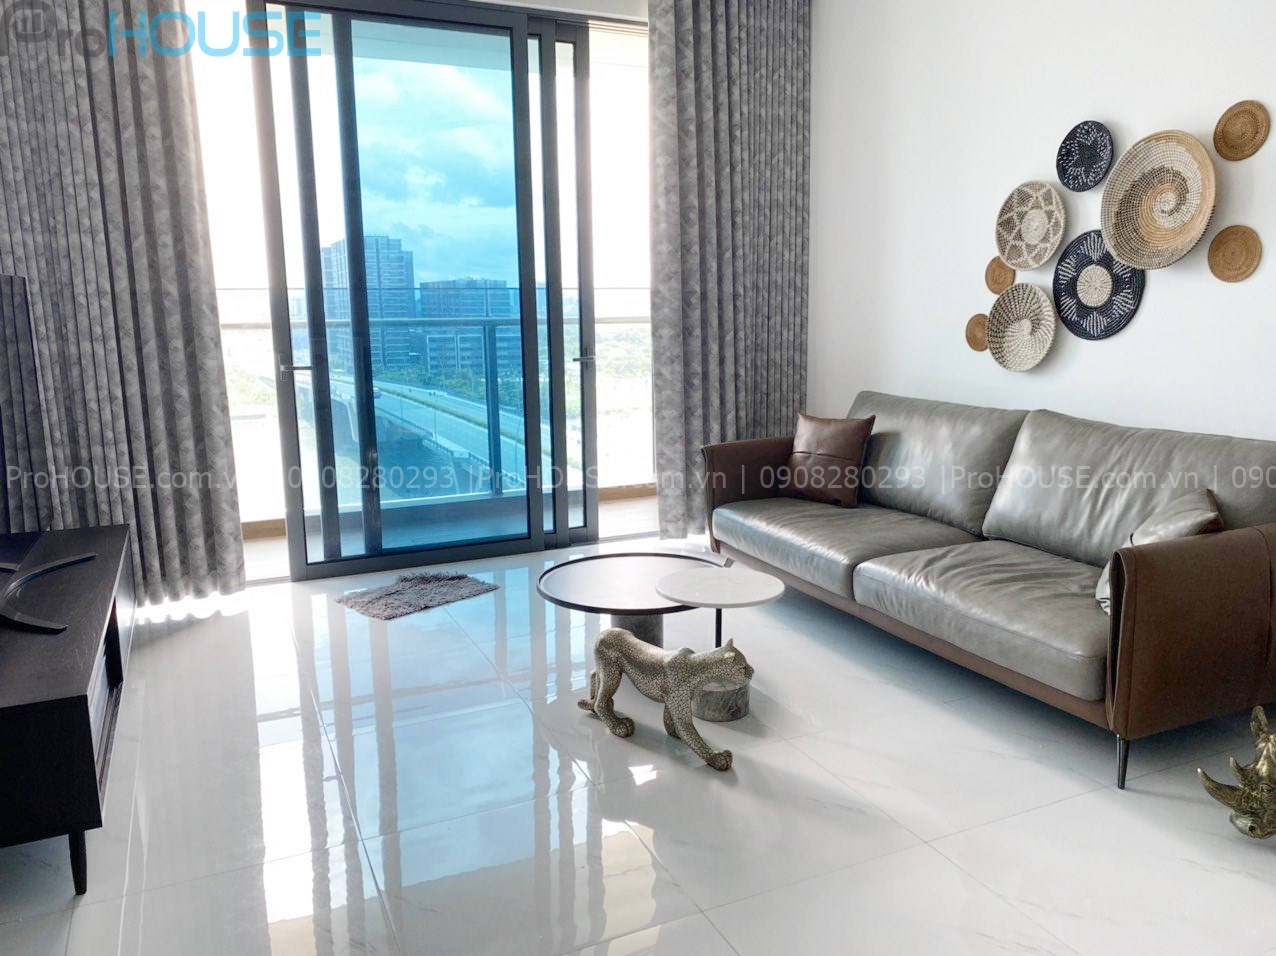 Beautiful apartment for rent in Sunwah Pearl with luxury decorated furniture